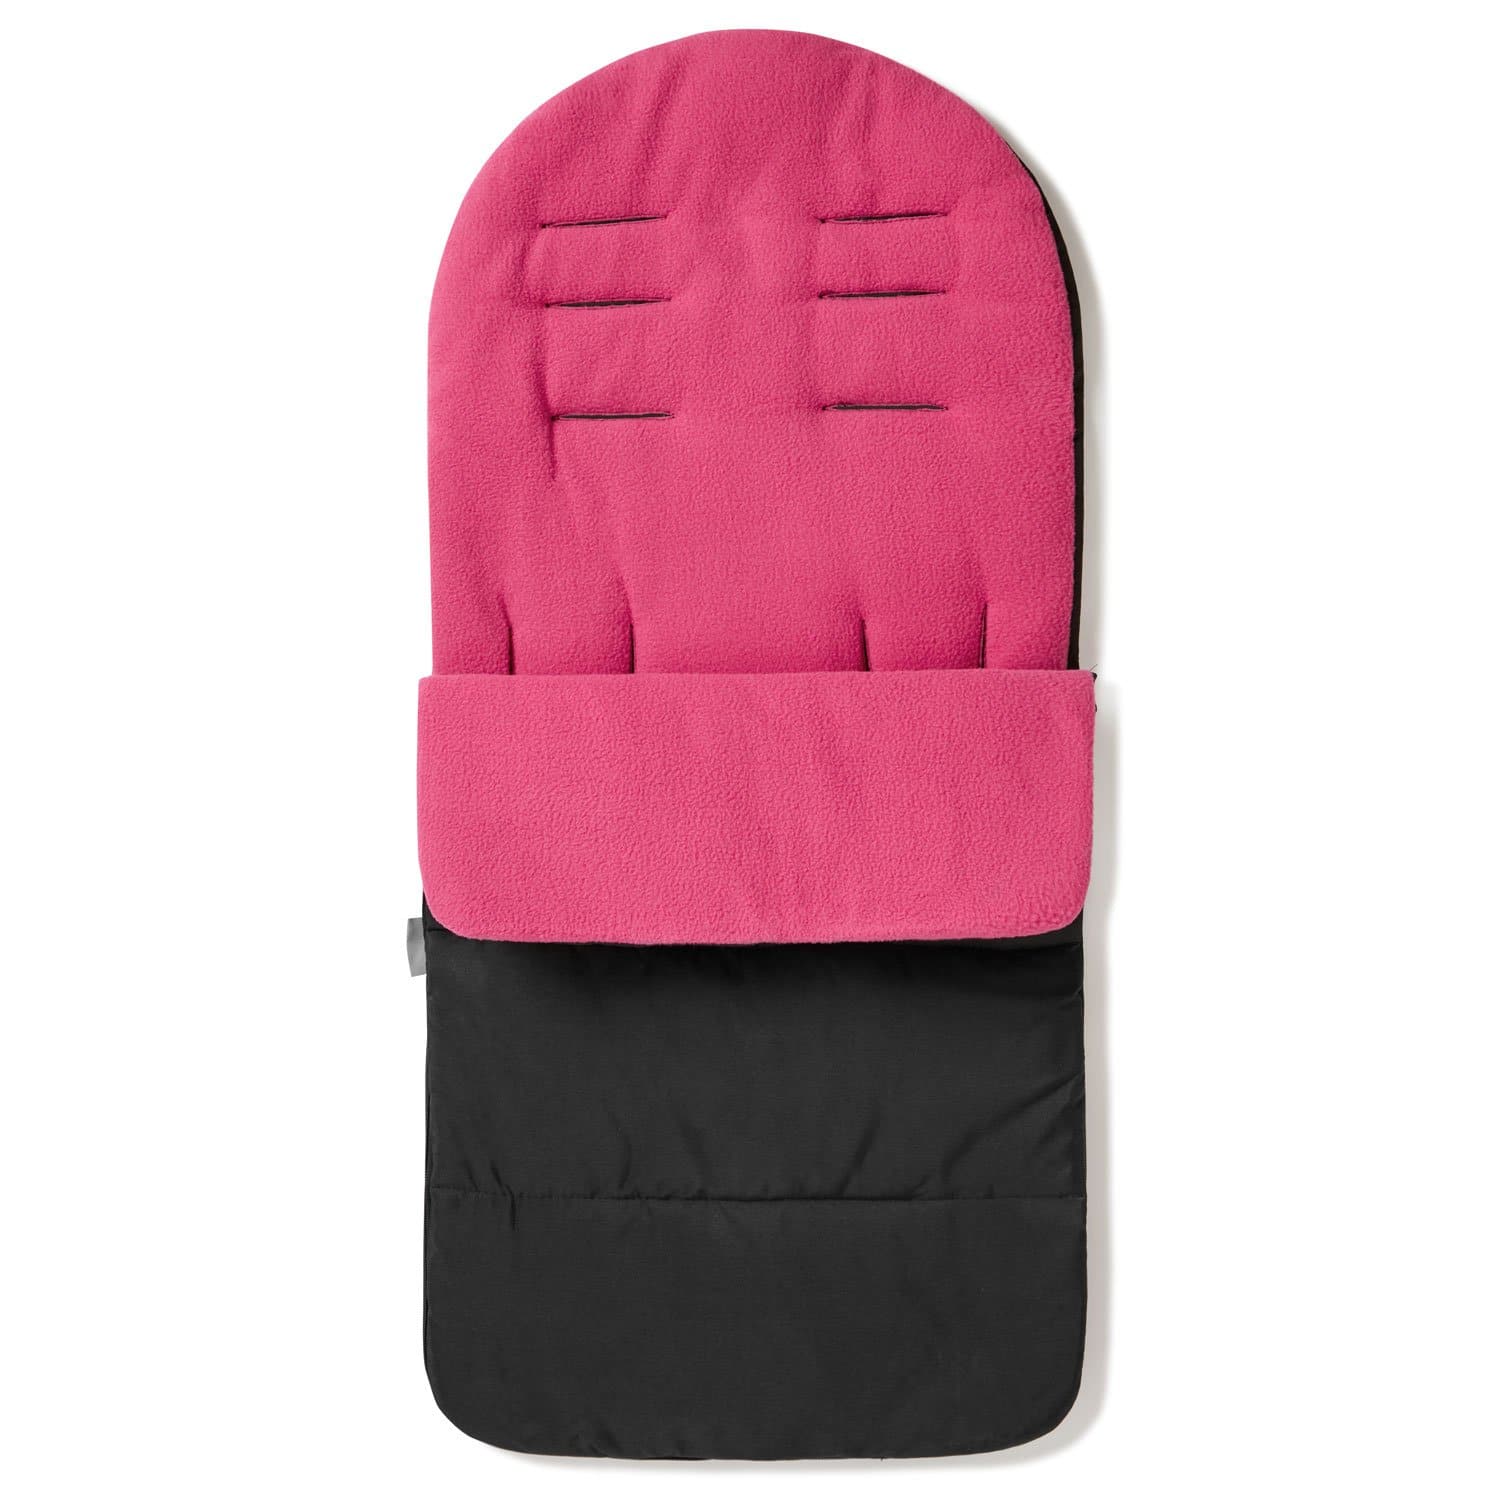 Premium Footmuff / Cosy Toes Compatible with Hartan - Pink Rose / Fits All Models | For Your Little One